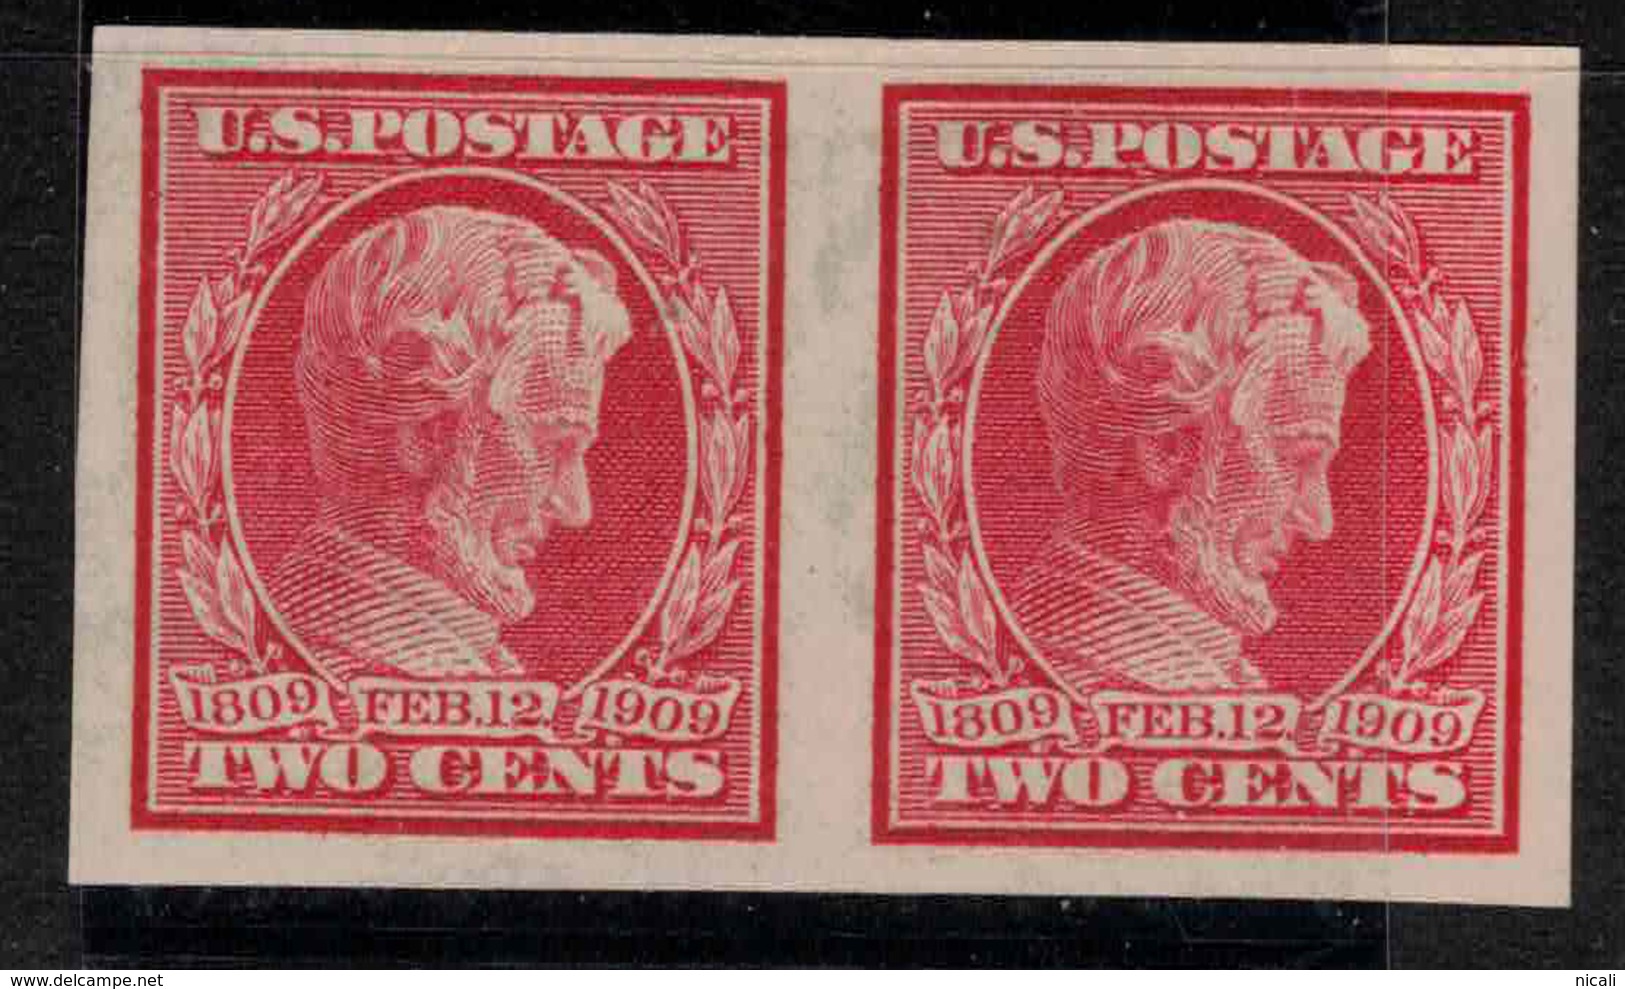 USA 1909 2c Lincoln Imperf Pair SG 375 HM #AXB51 - Unused Stamps